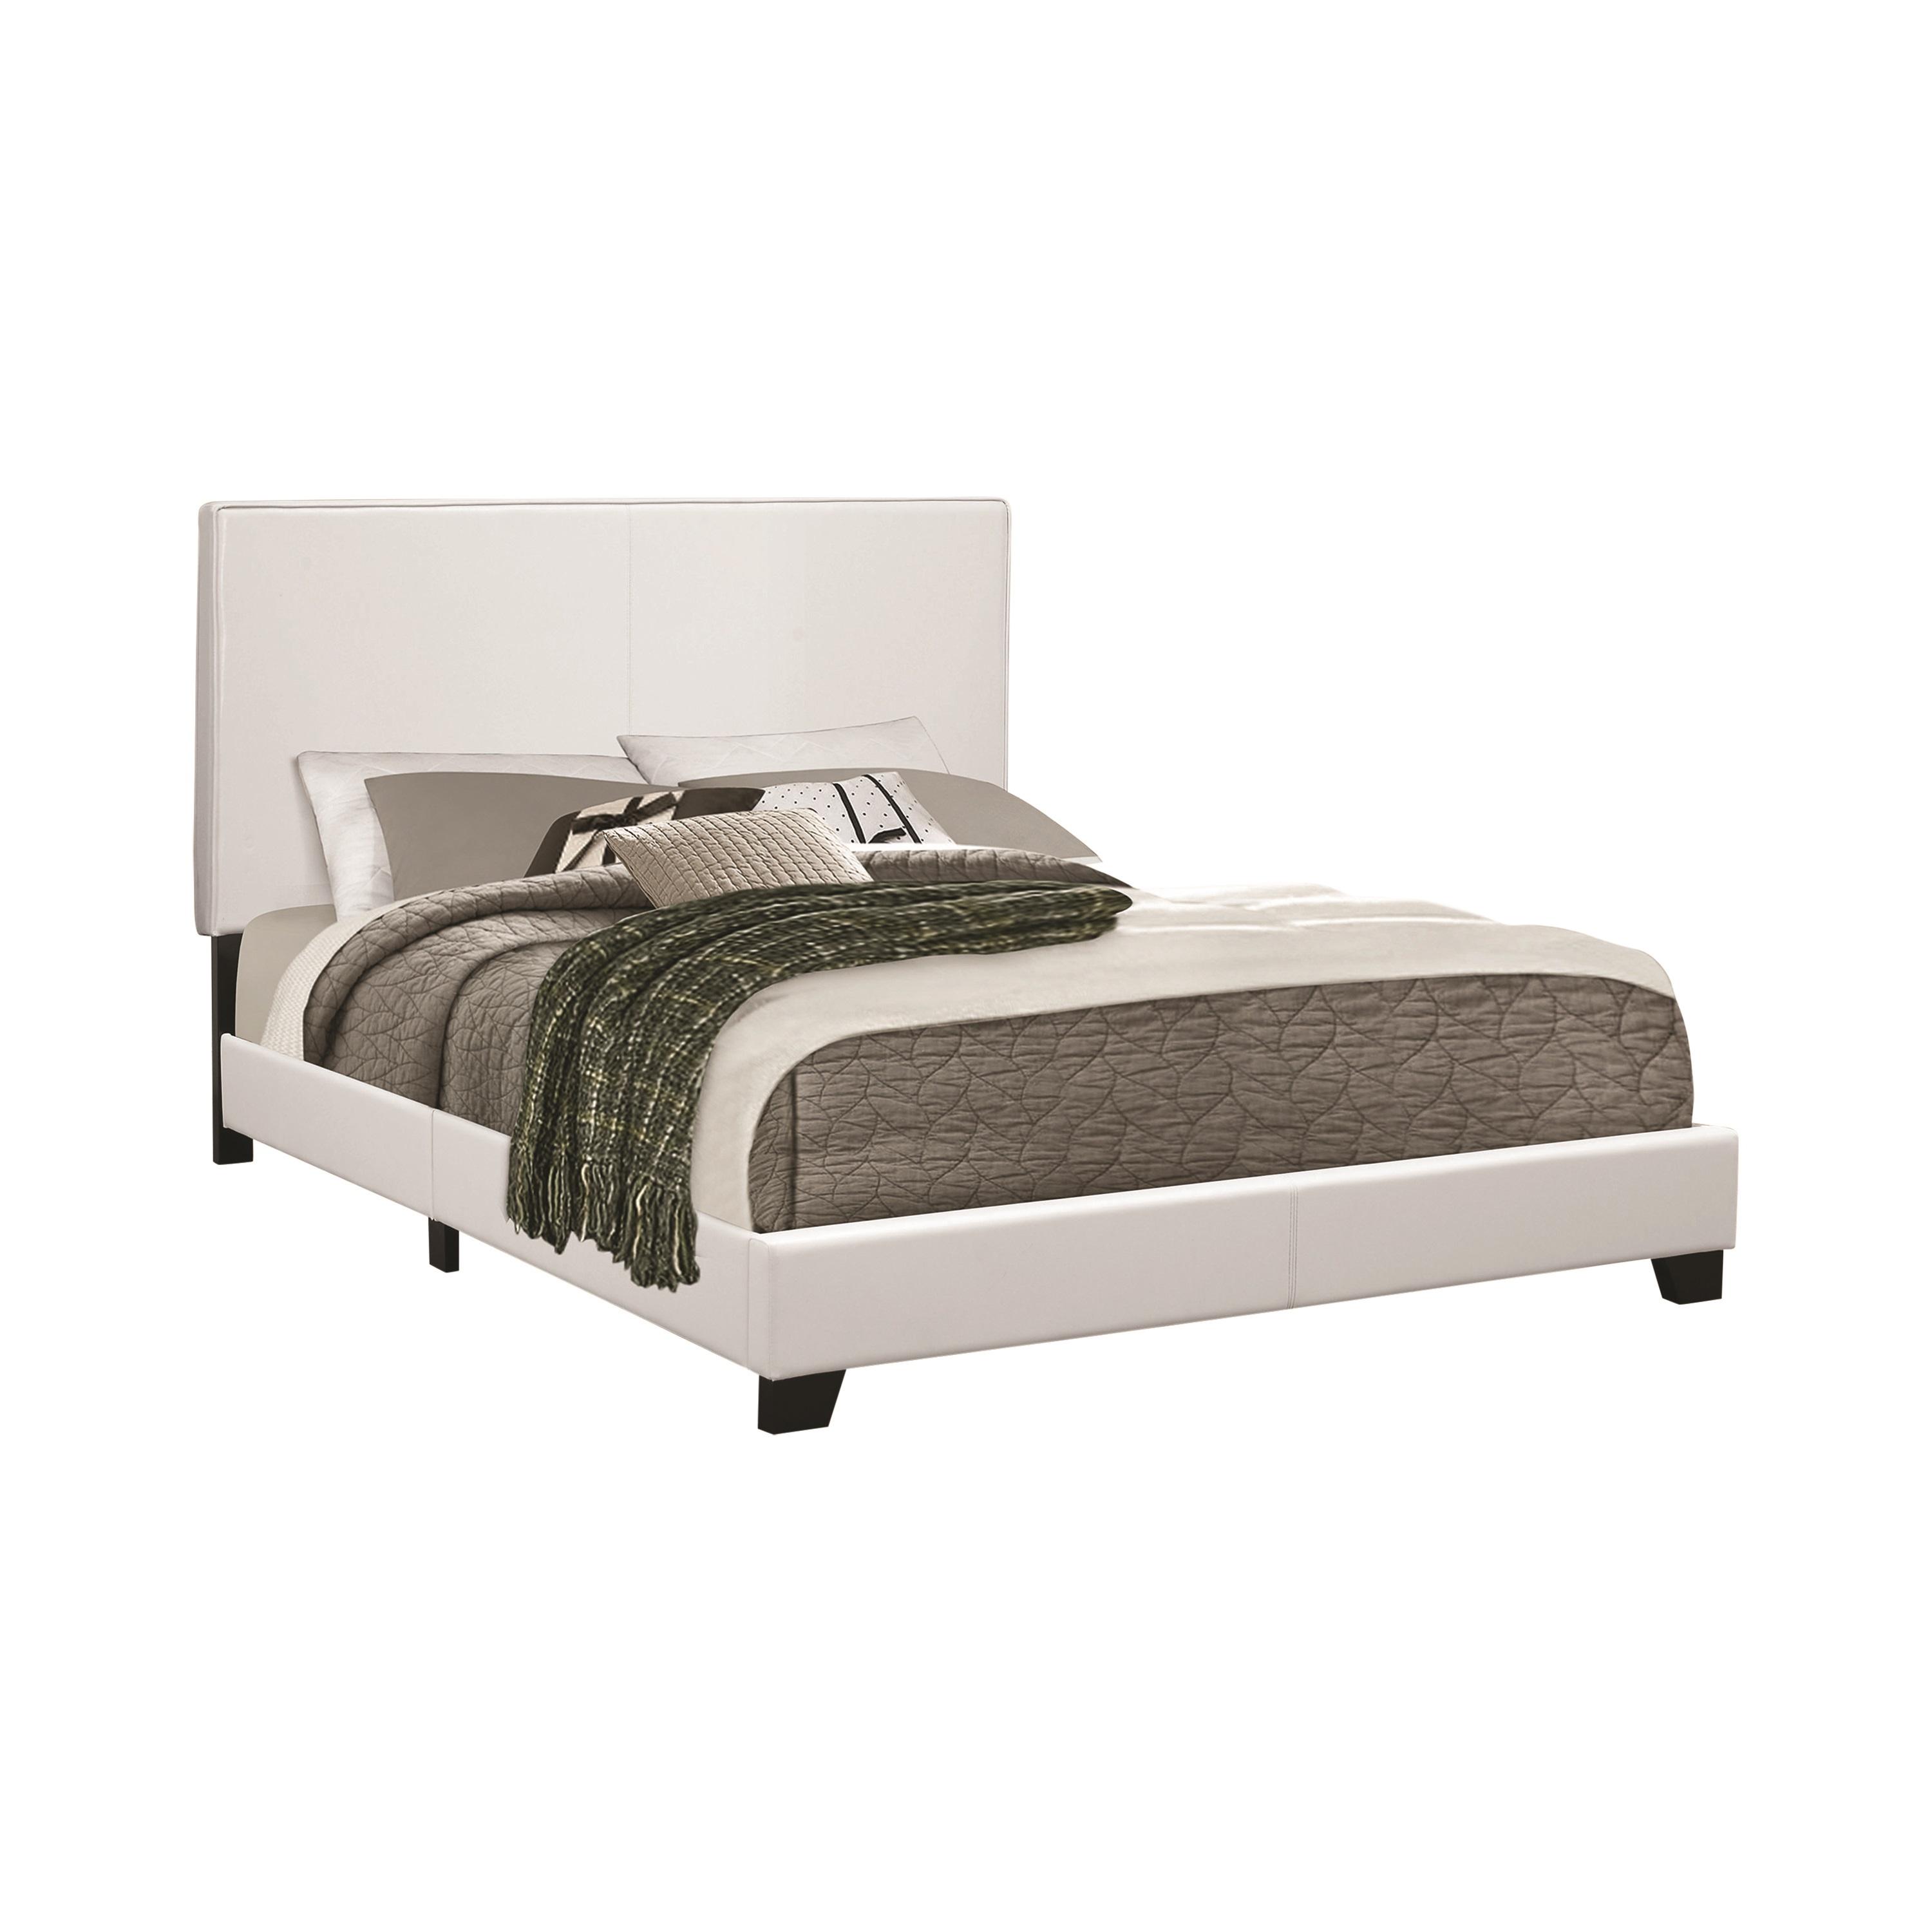 Modern Bed 300559Q Muave 300559Q in White Leatherette